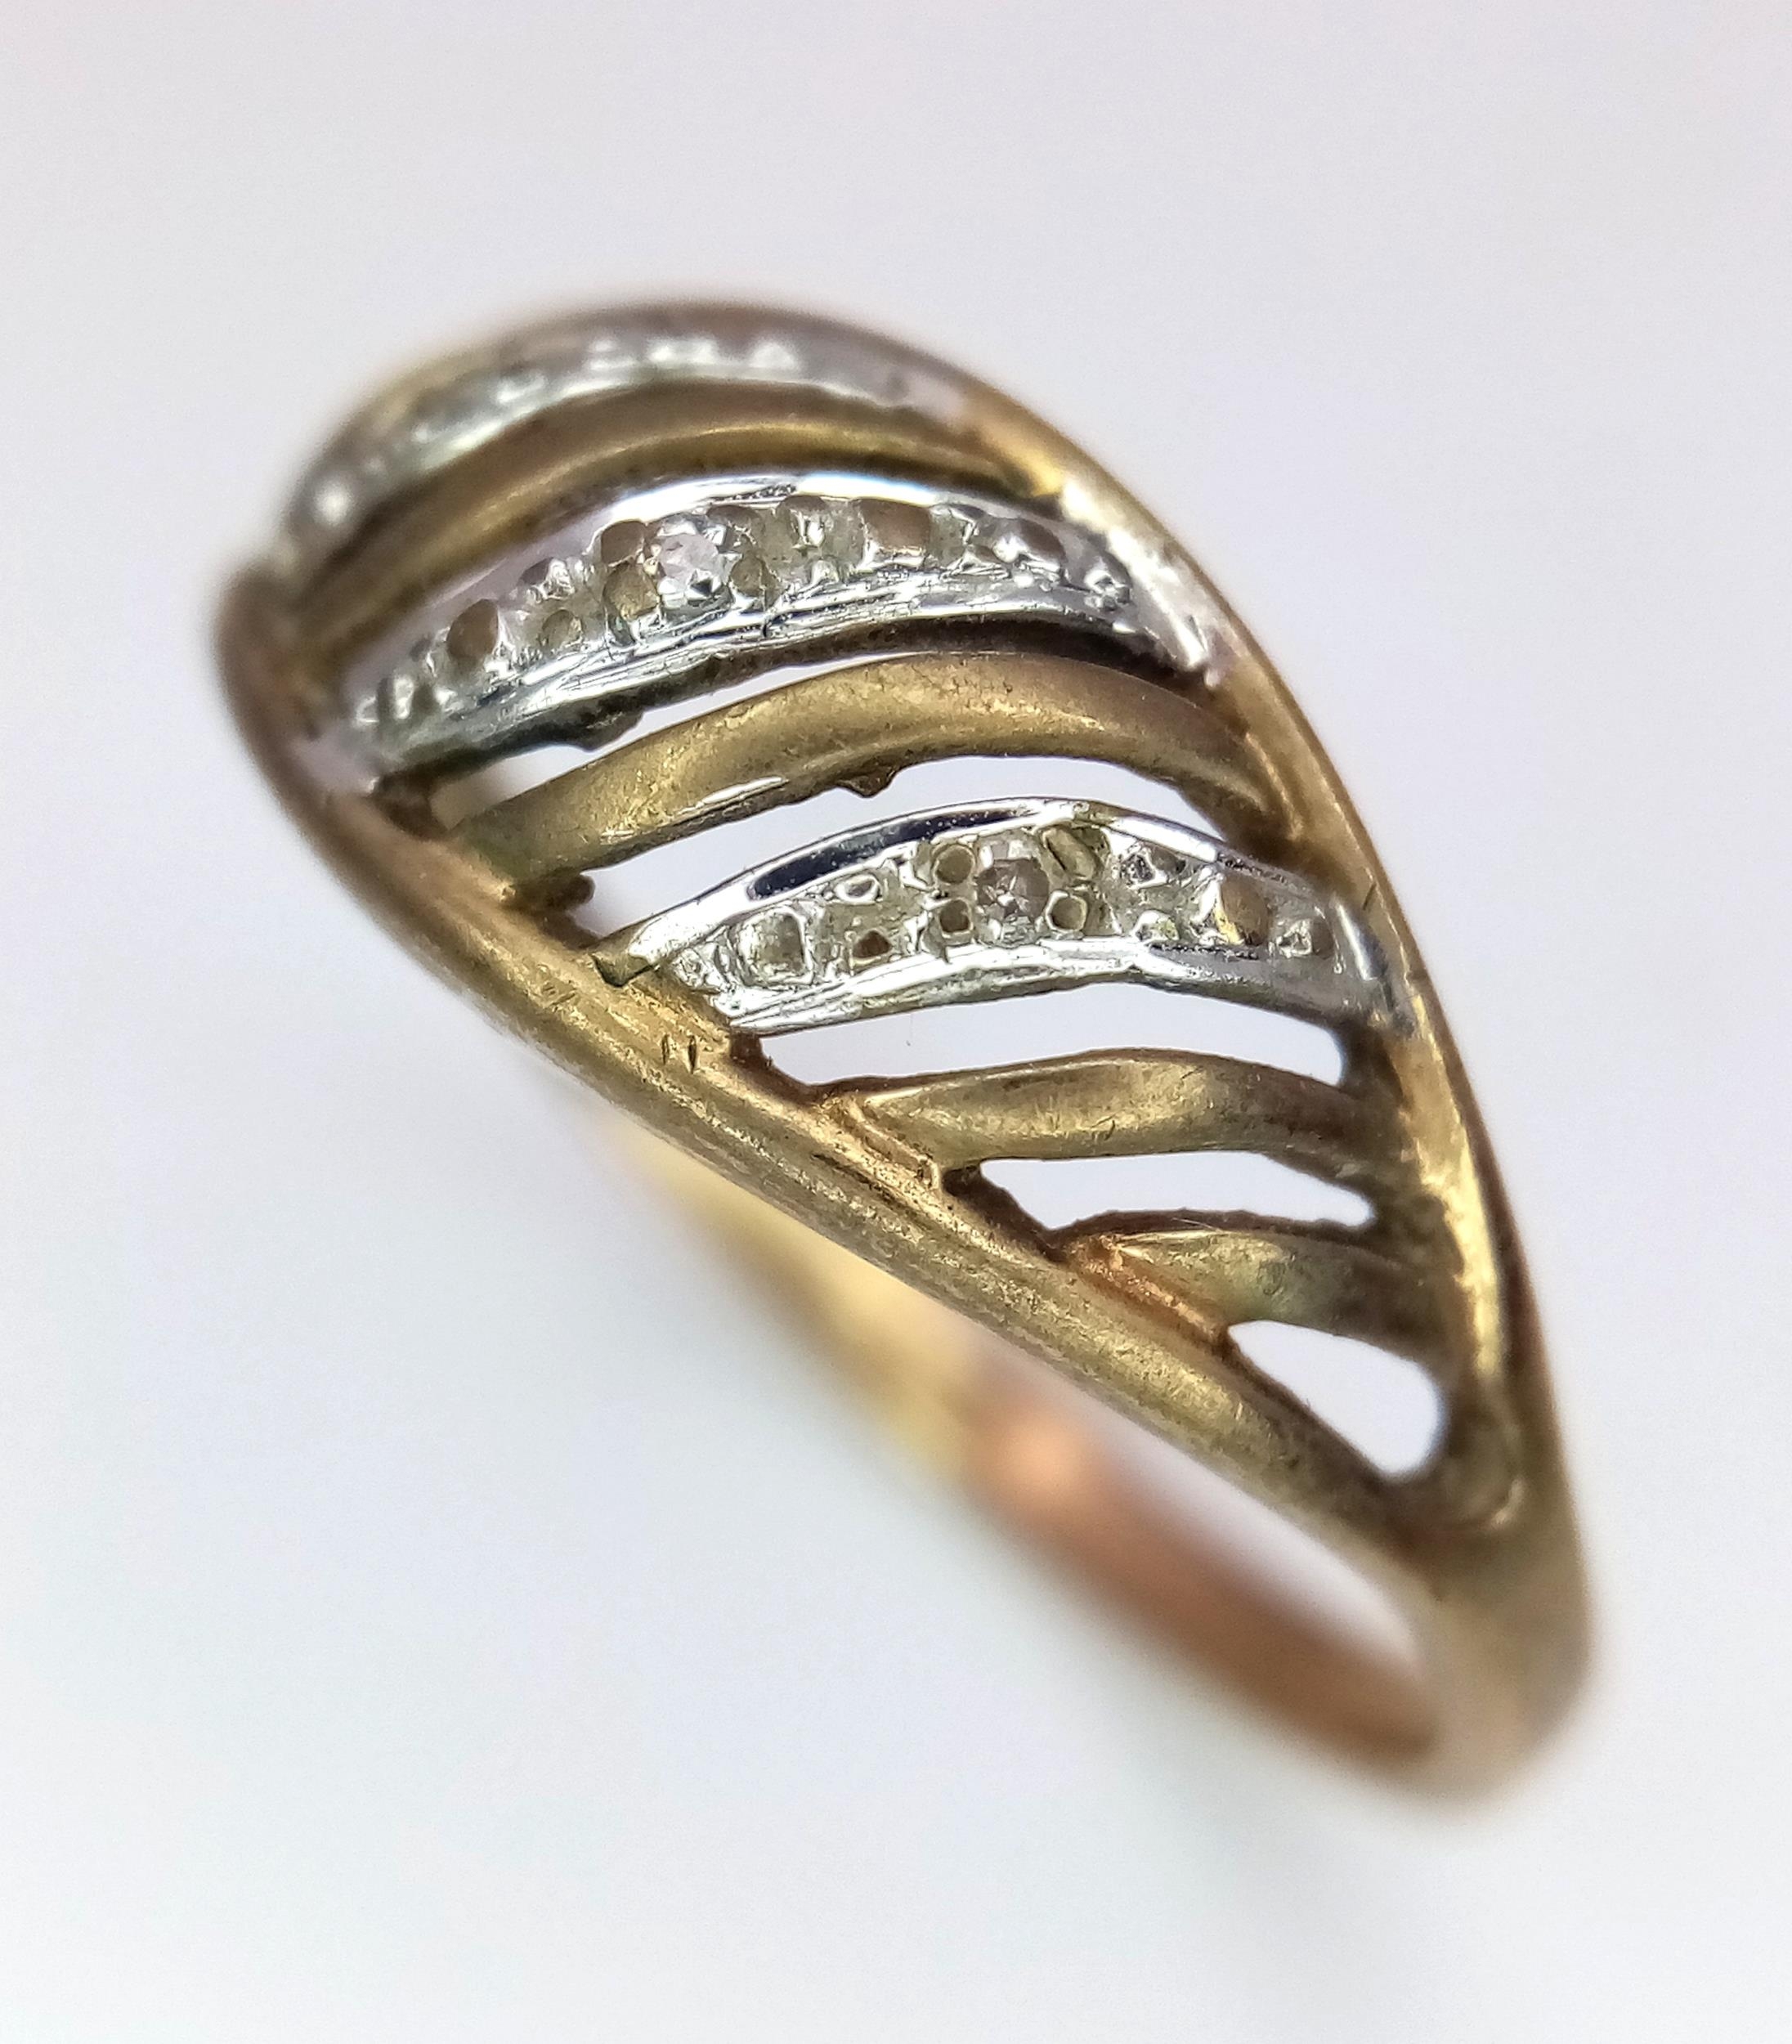 A Vintage 9K Yellow Gold Small Diamond Wave Ring. Size N. 1.8g weight. - Image 3 of 5